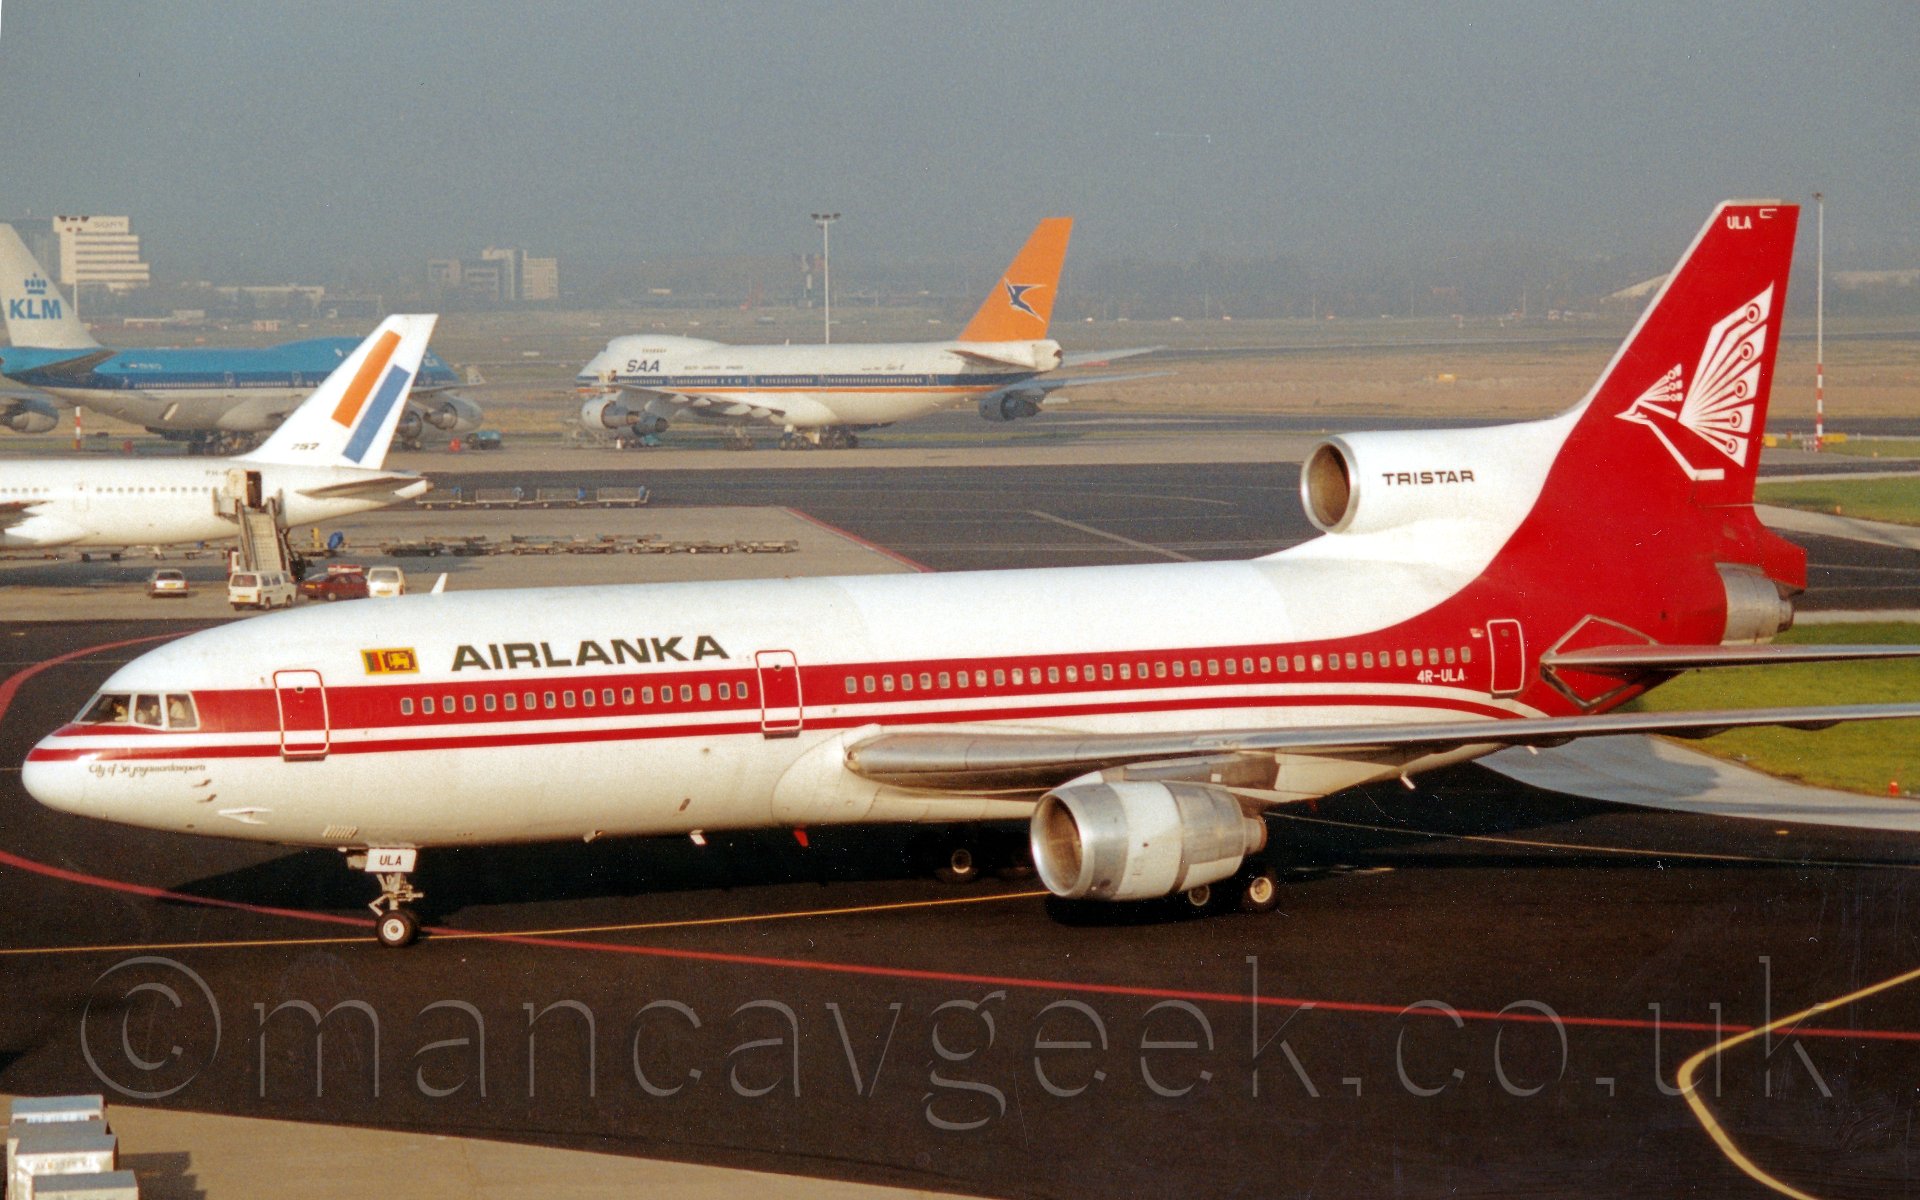 Side view of a 3 engined jet airliner taxiing from right to left. The plane is mostly white with a thick red line running rearward from the nose, covering the cabin windows, before sweeping up to encompass most of the tail and rear fuselage. There are "Air Lanka" titles on the upper forward fuselage, and a white stylised flying bird on the tail, with additional "TRISTAR" titles on the centre engine air intake In the background, there are seveeral aircraft parked, with large grassed areas leading off into the distance, eventually vanishing in to haze.